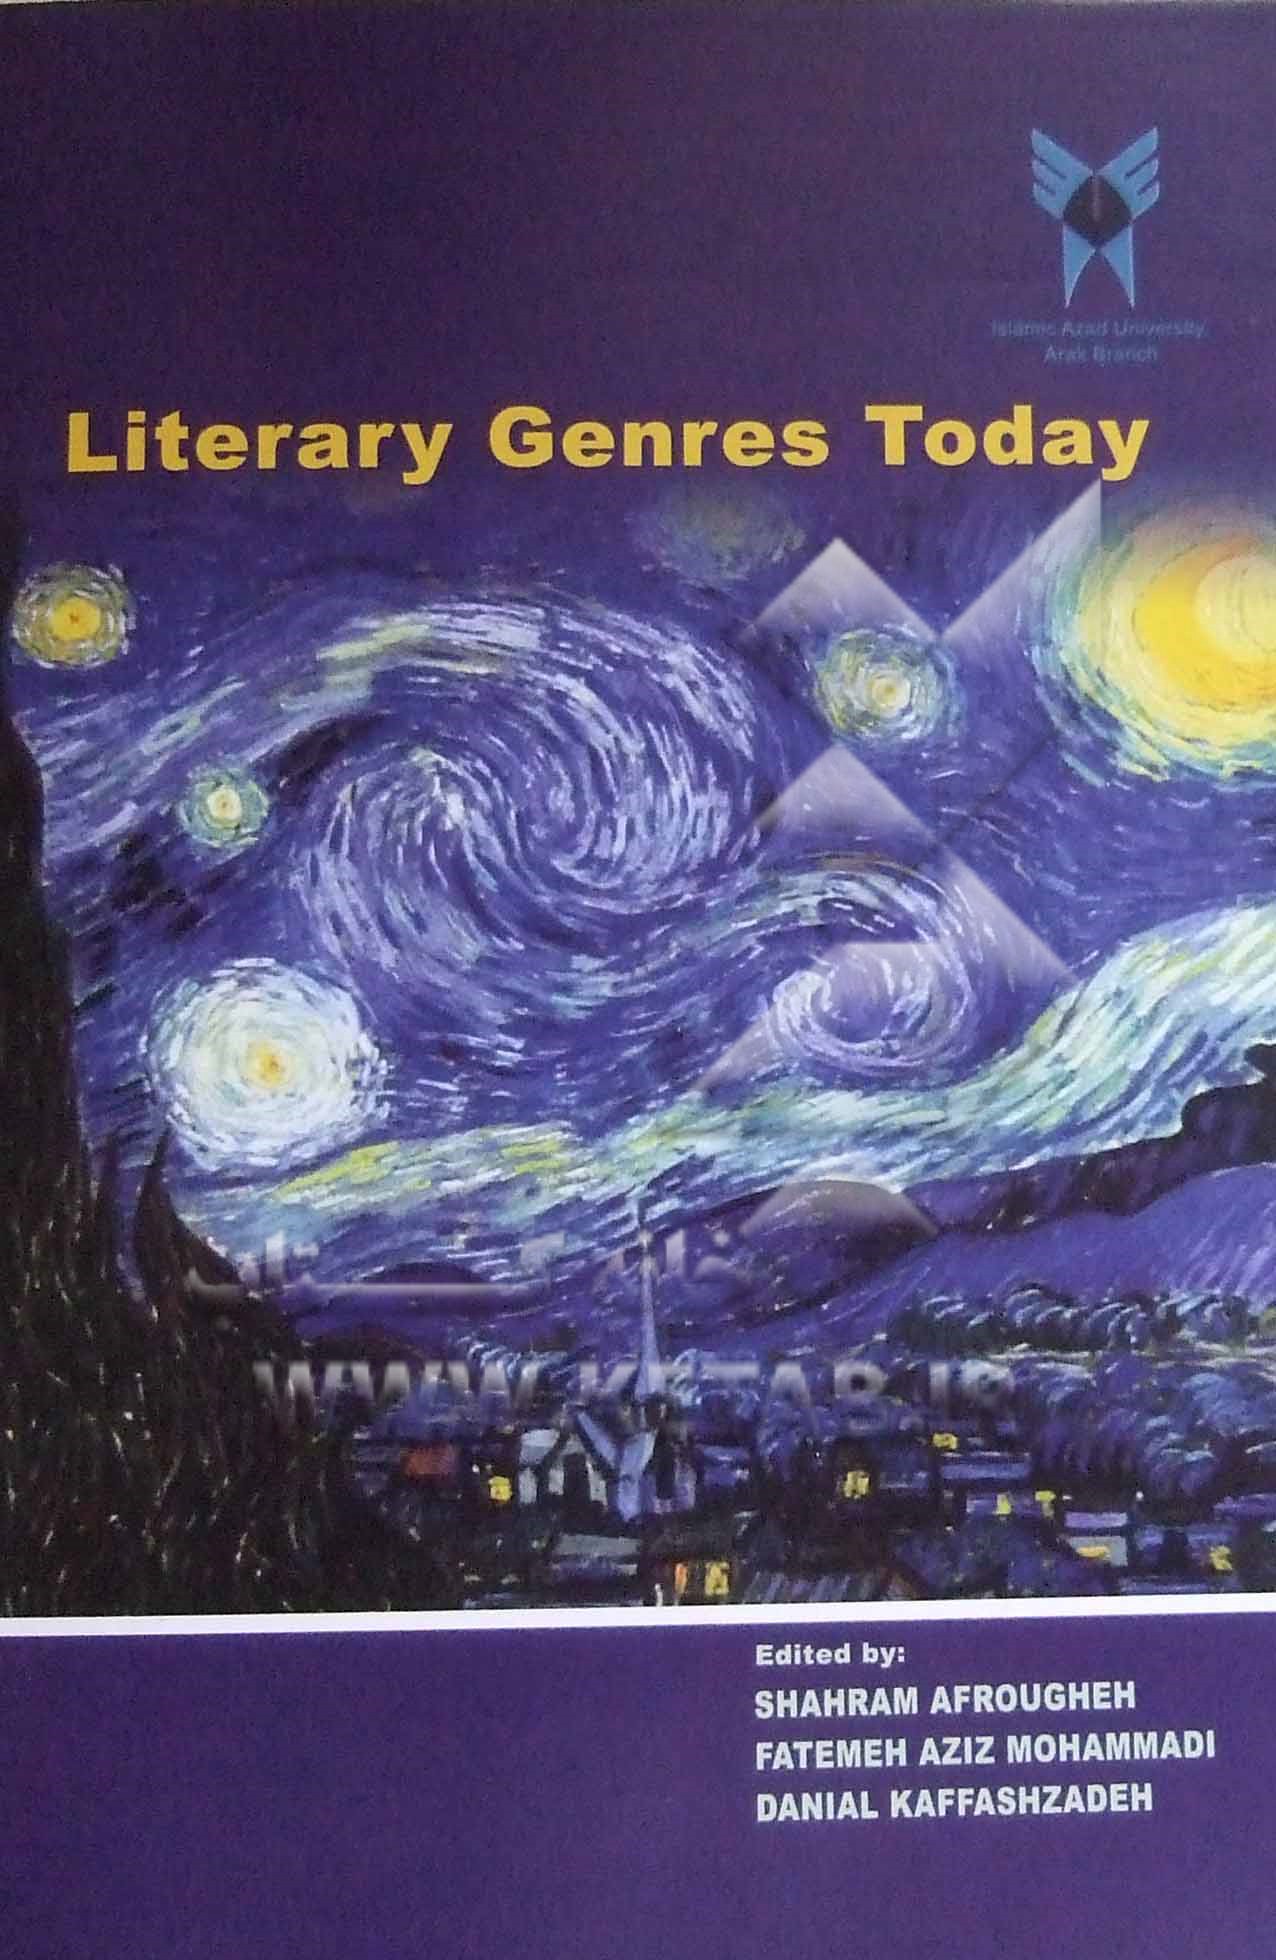 Literary genres today: an outlook on major contemporary literary genres